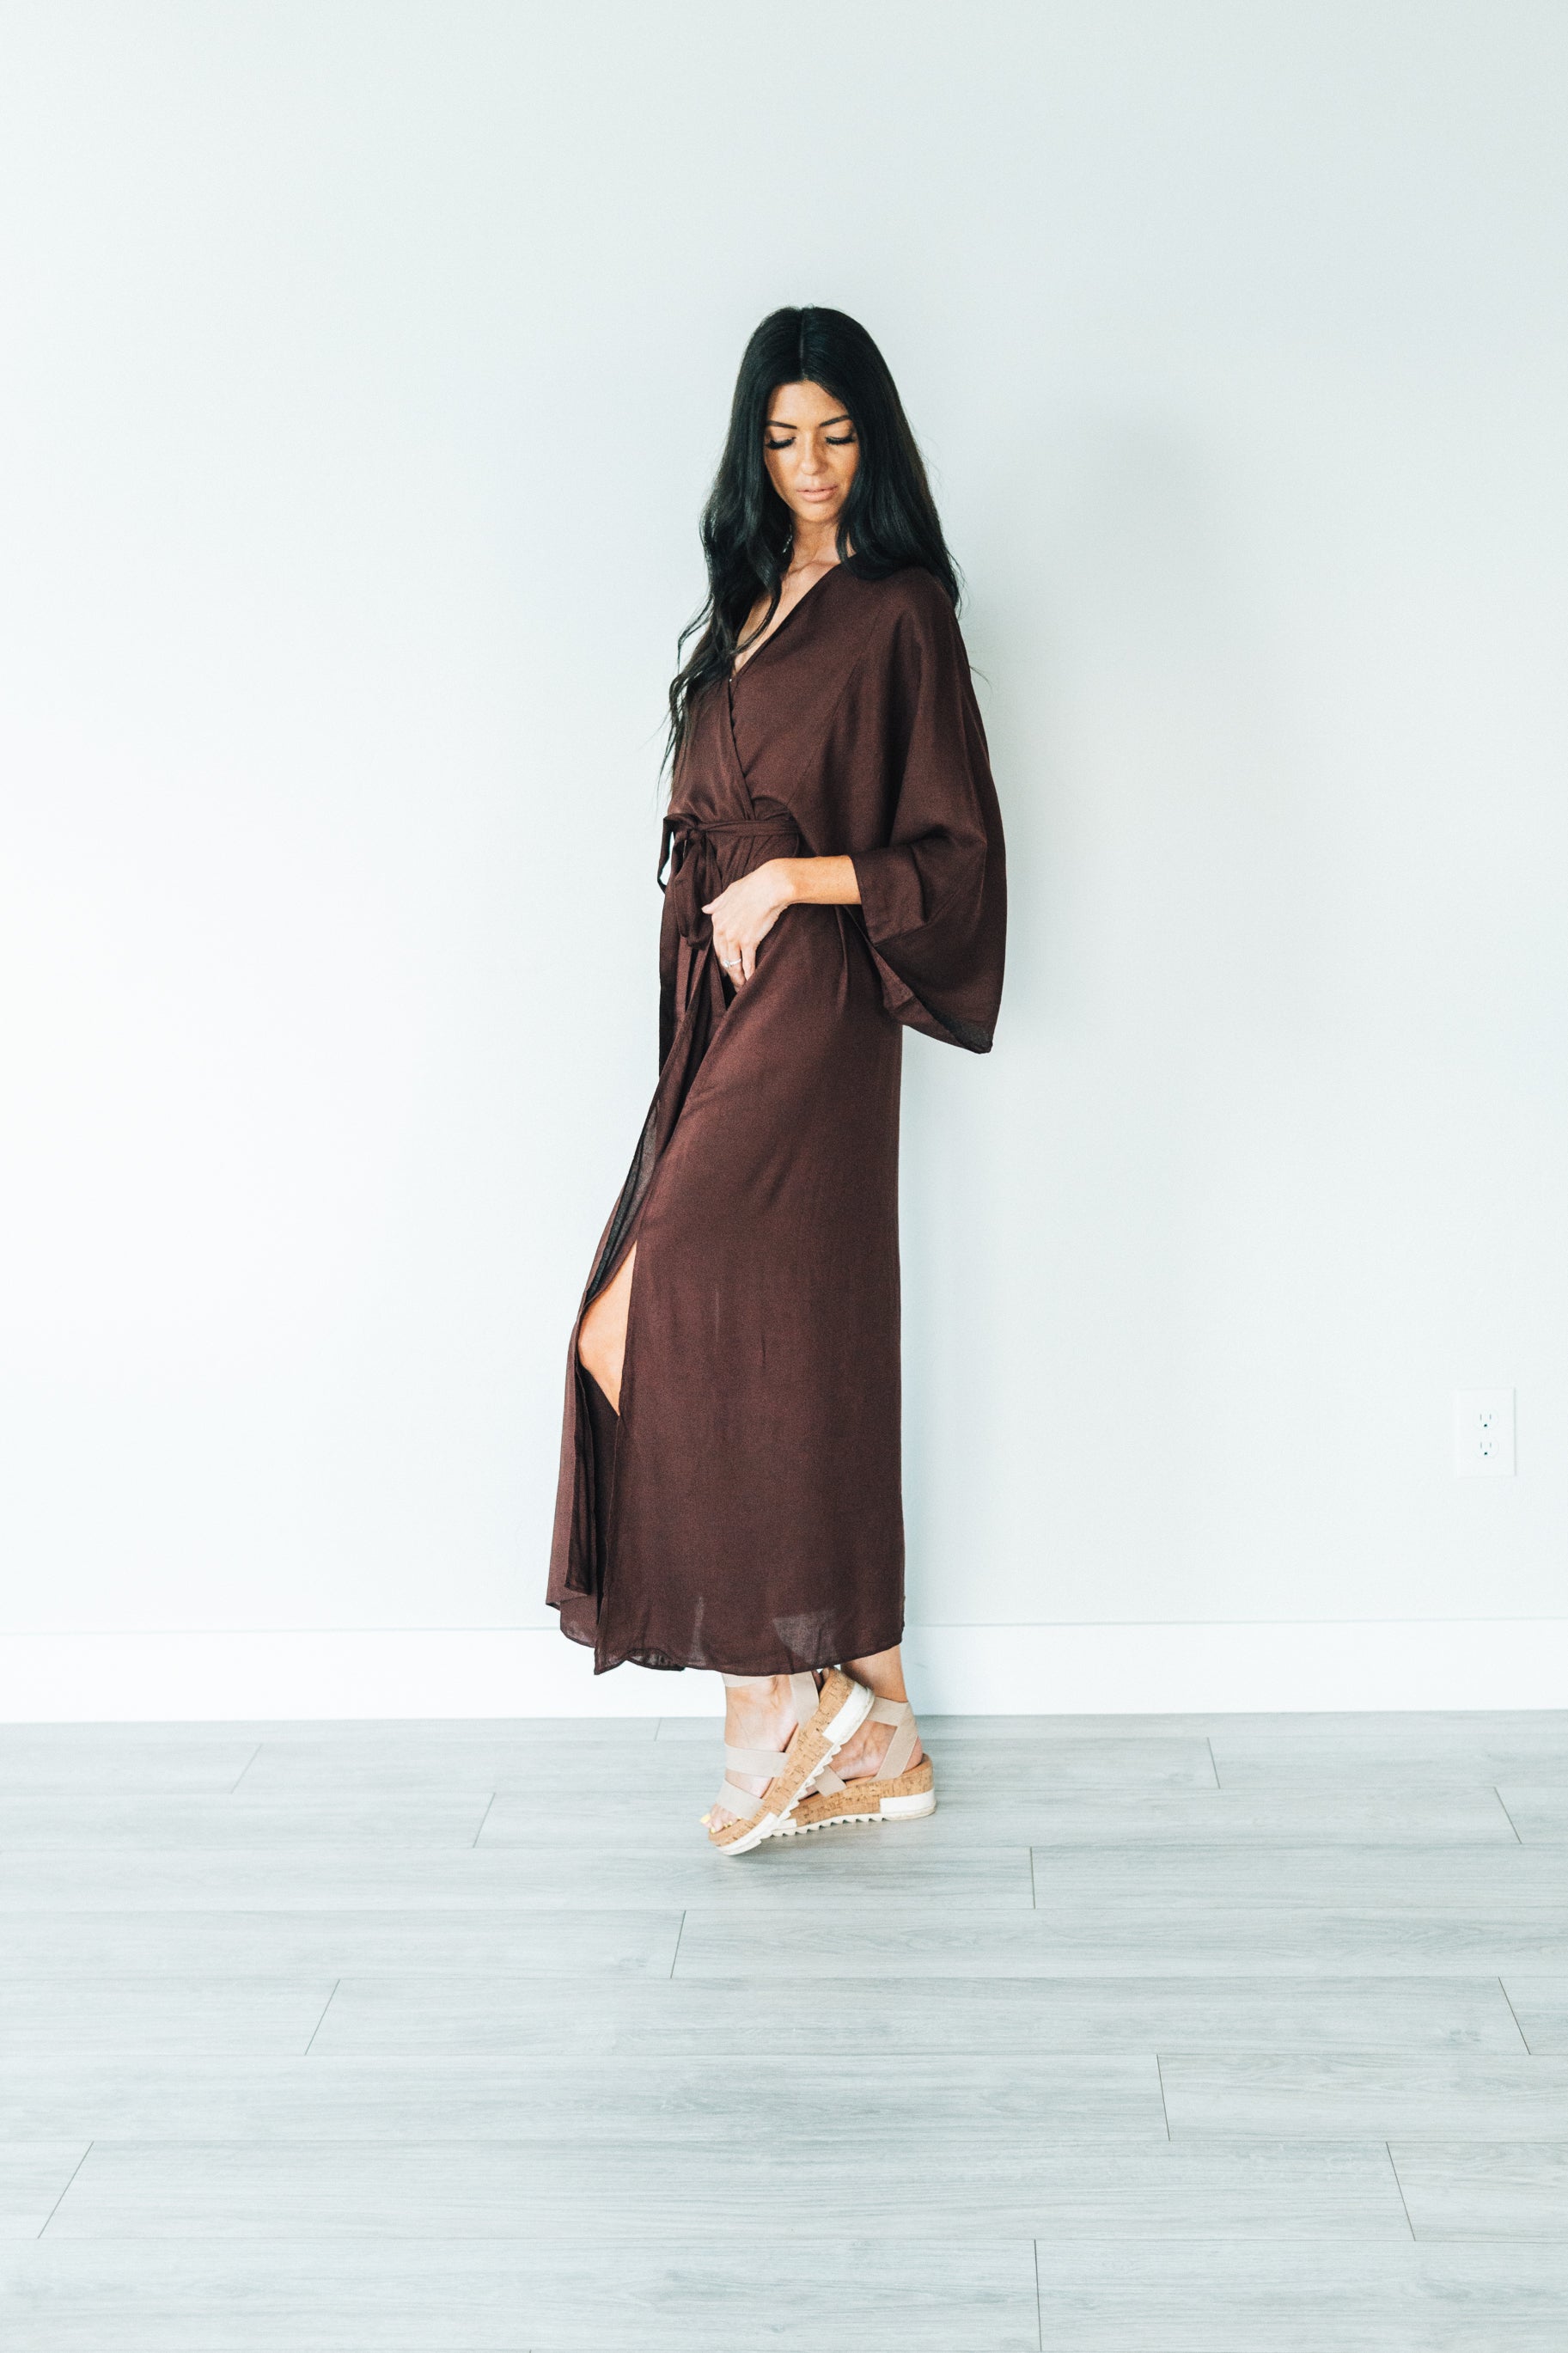 Dark Brown Robe With Pockets, Duster Cardigan, Women Kimono Robe, Bridesmaid Robe, Plus Size Clothing, Duster Robe, Caftan Robe,Spa Cover Up